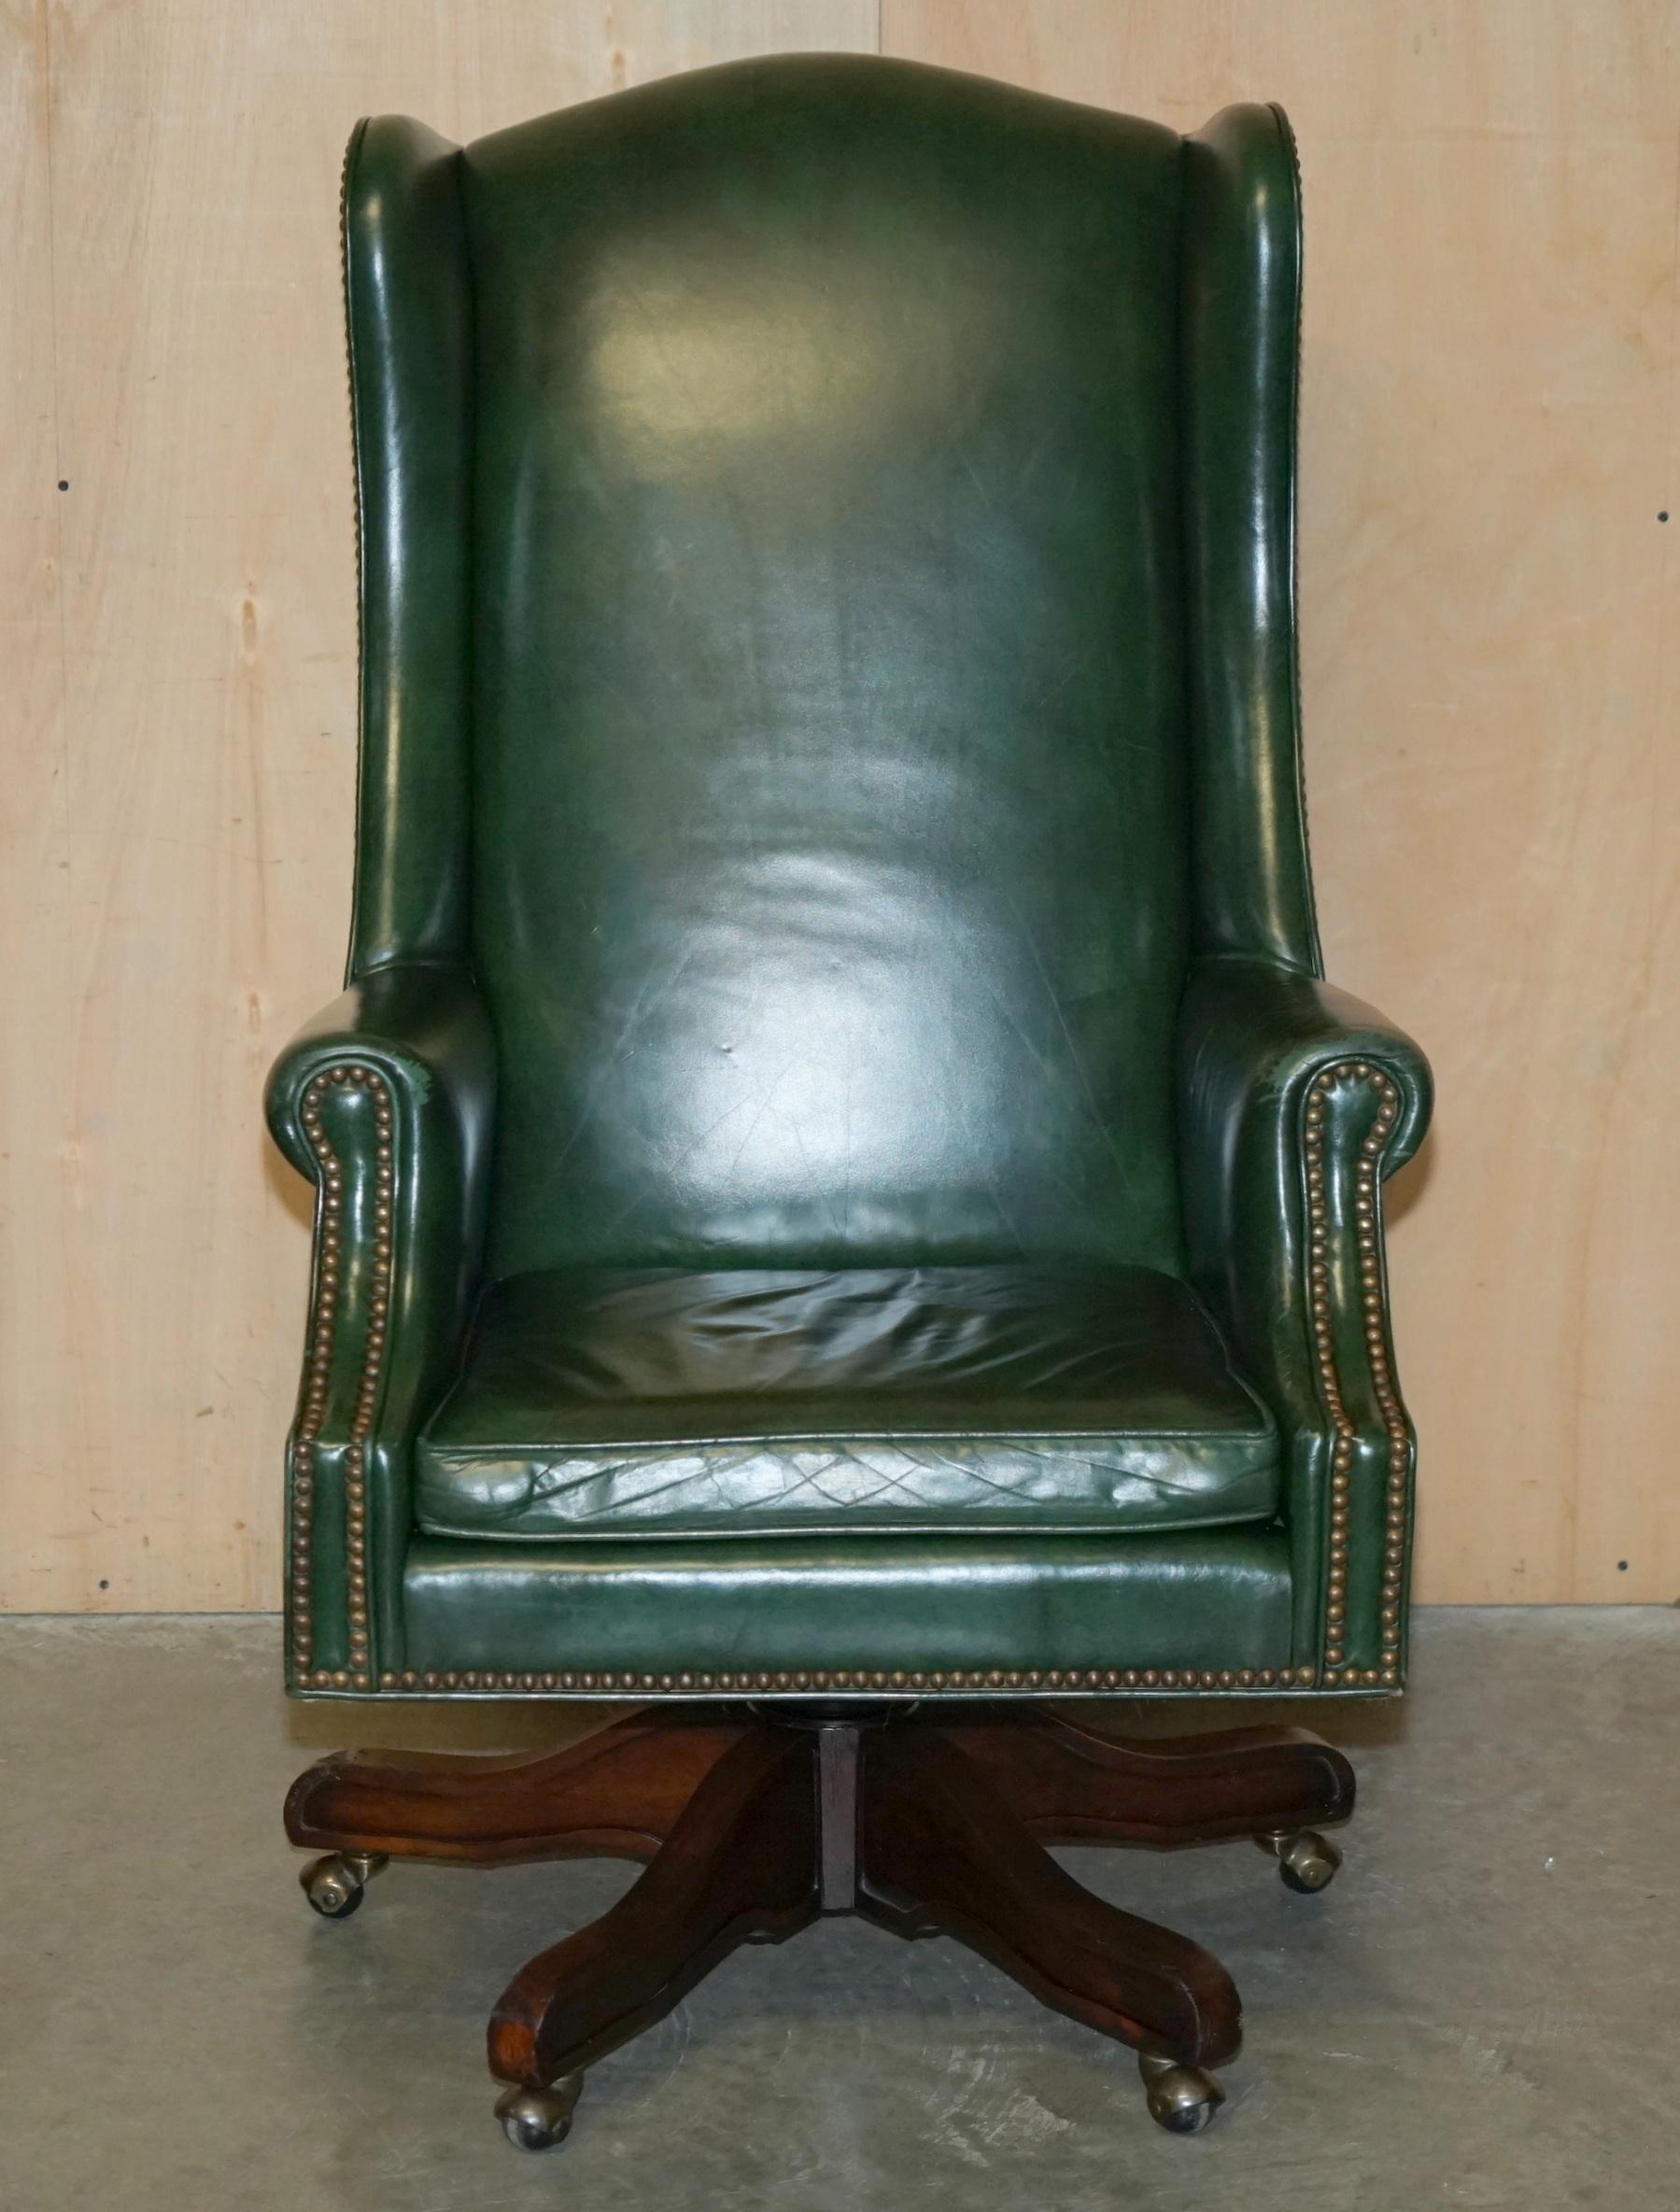 Royal House Antiques

Royal House Antiques is delighted to offer for sale this very comfortable Heritage green leather wingback swivel office armchair 

Please note the delivery fee listed is just a guide, it covers within the M25 only for the UK